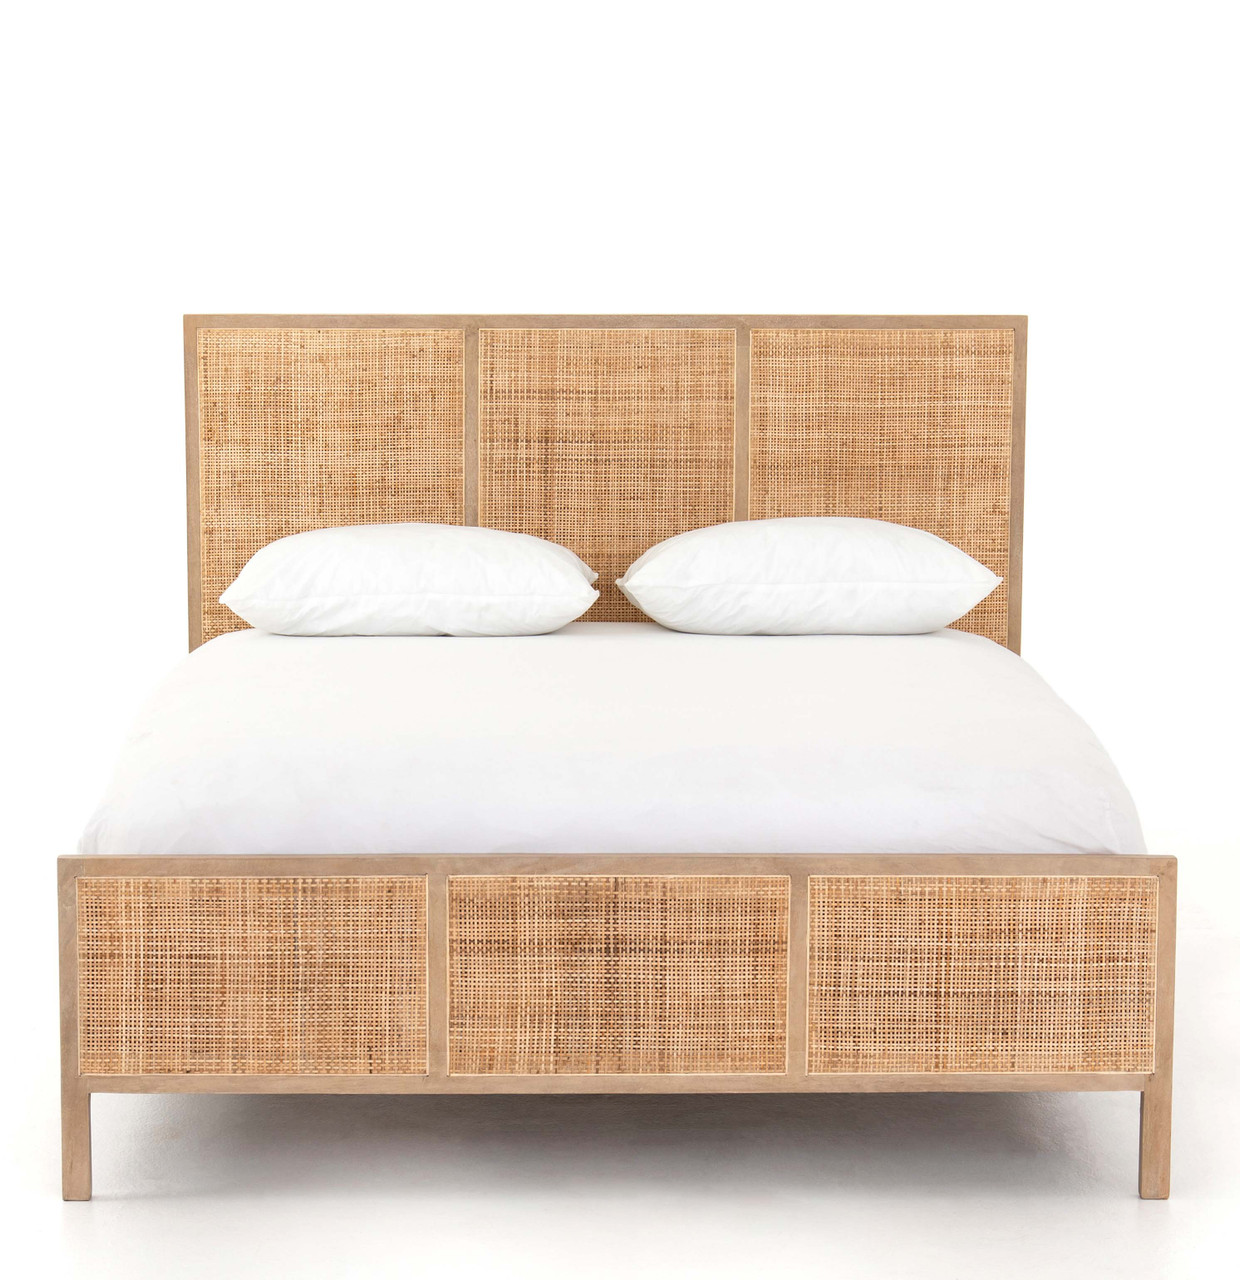 Bondi Woven Cane Bed features a solid natural light mango wood frame with inlaid natural woven cane